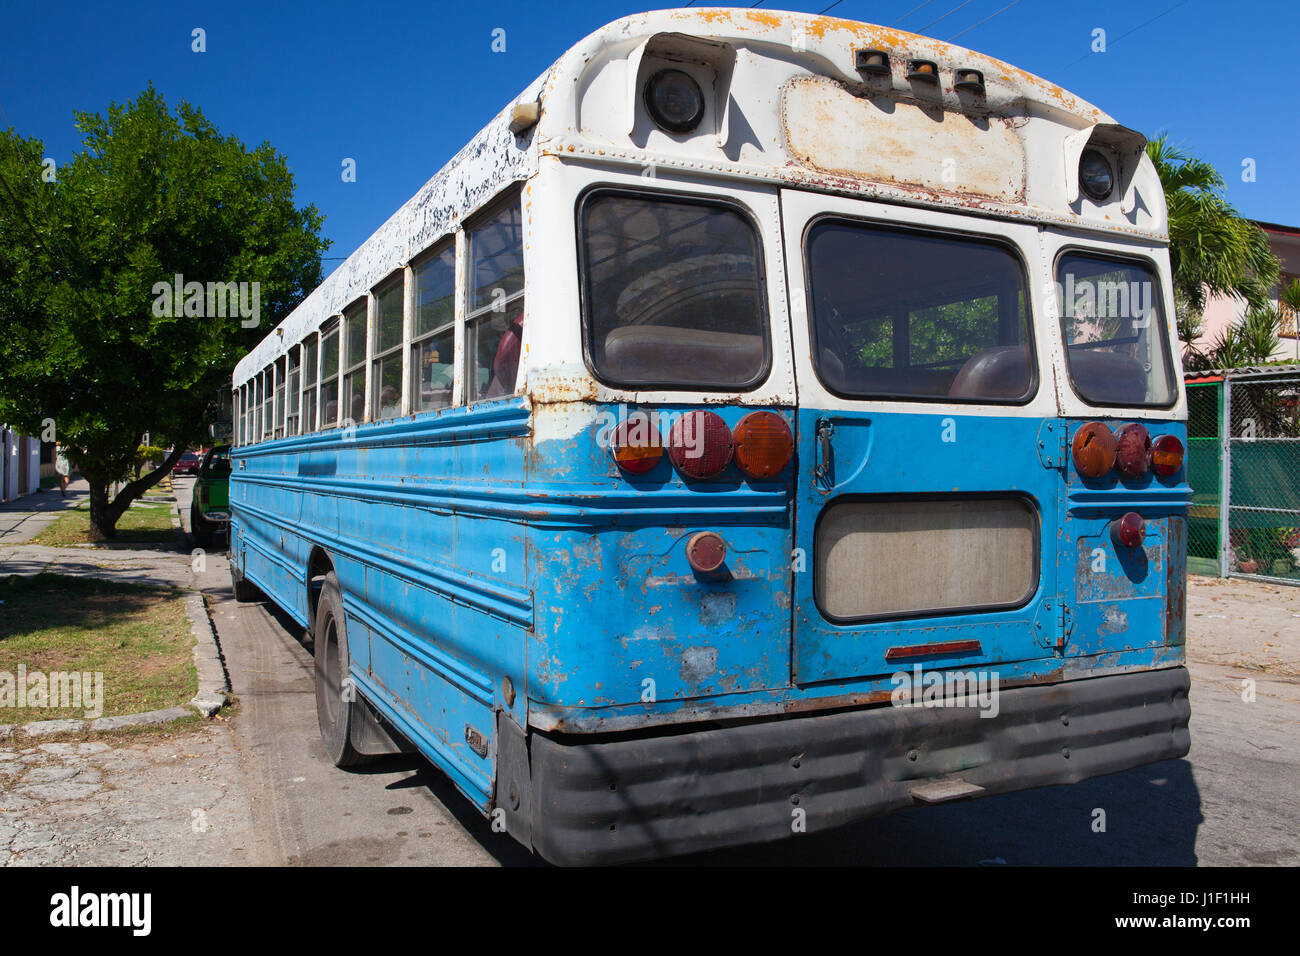 Typical old school bus parked in front of an old building on the Havana street. Cuba Stock Photo